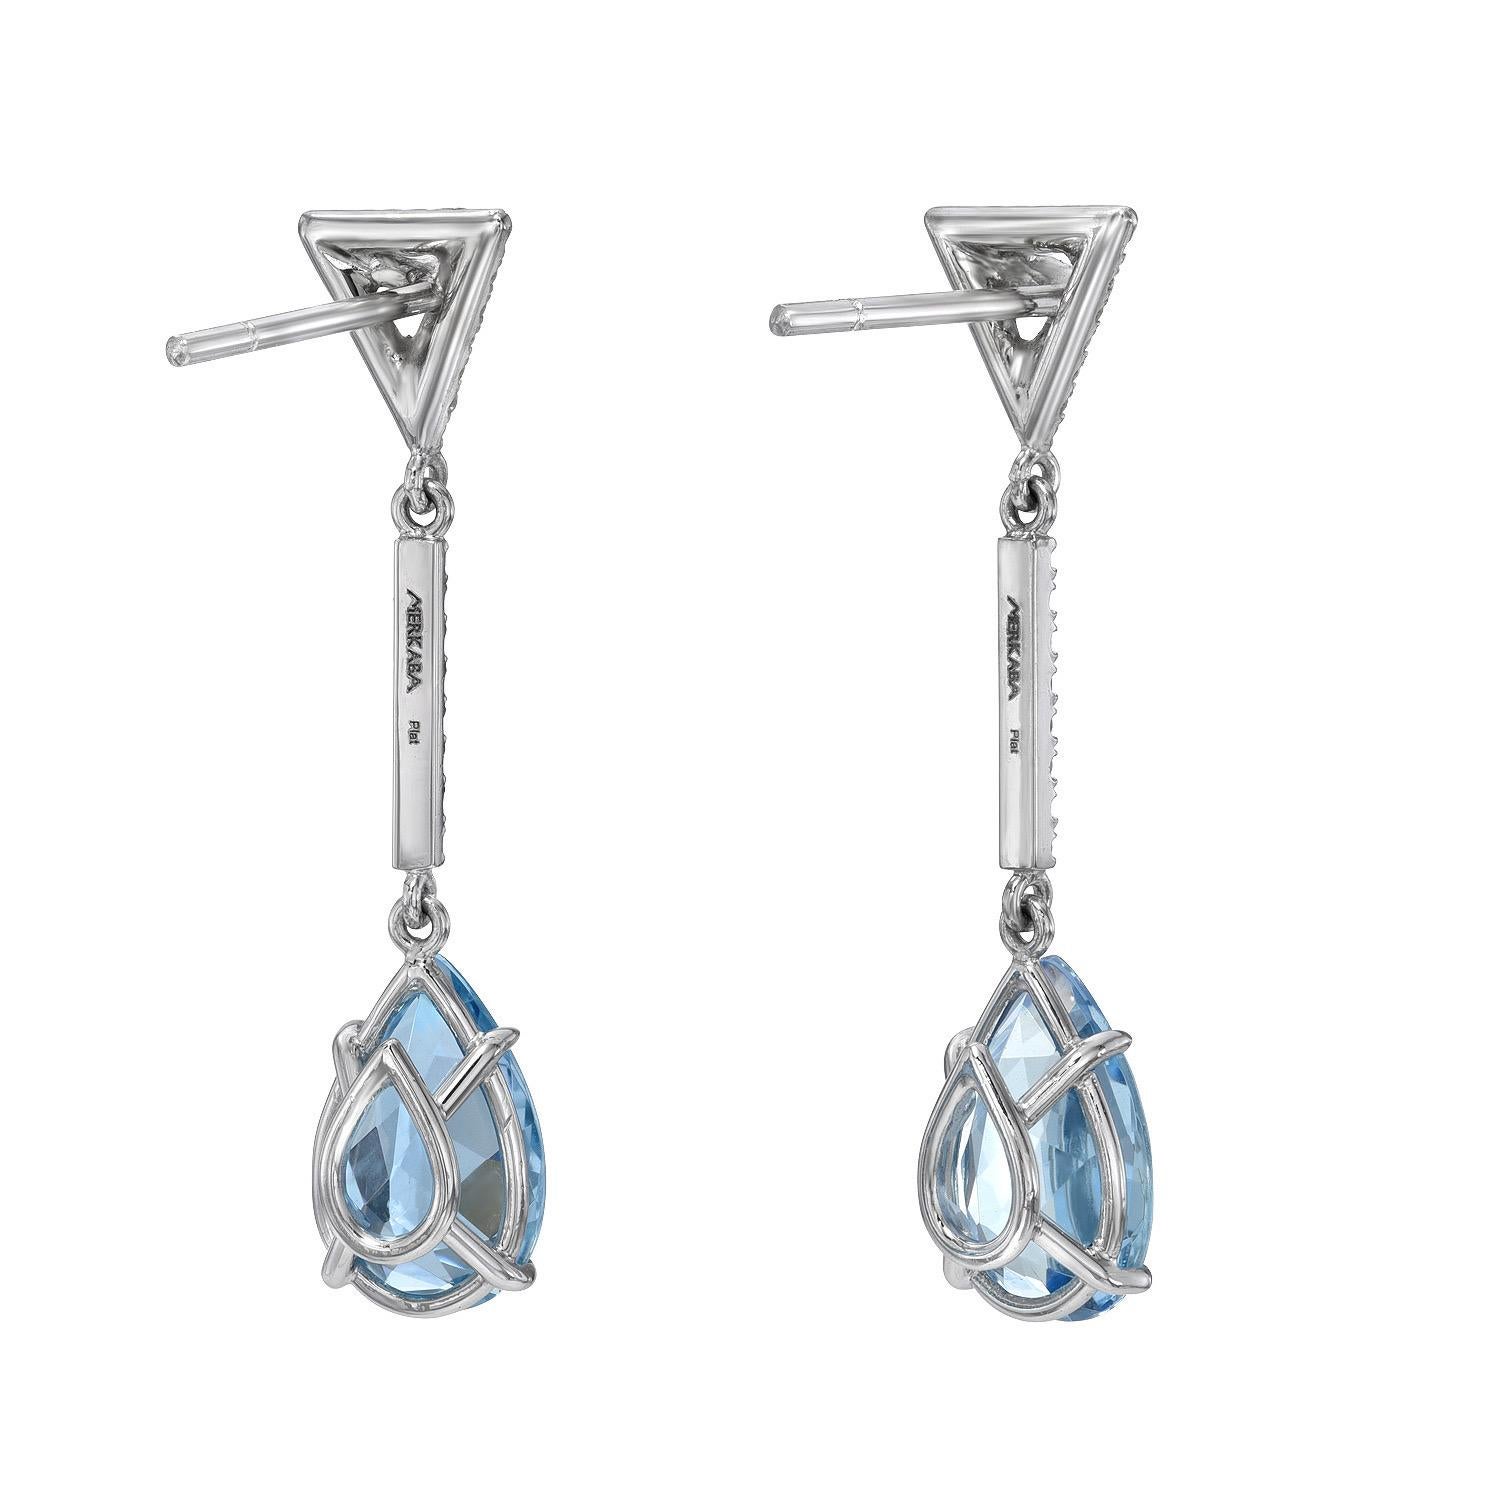 Top quality 4 carat Aquamarine pear shape platinum earrings, decorated with a total of 0.36 carat round brilliant collection diamonds, suspending from our signature three dimensional triangle diamond studs.
Crafted by extremely skilled hands in the